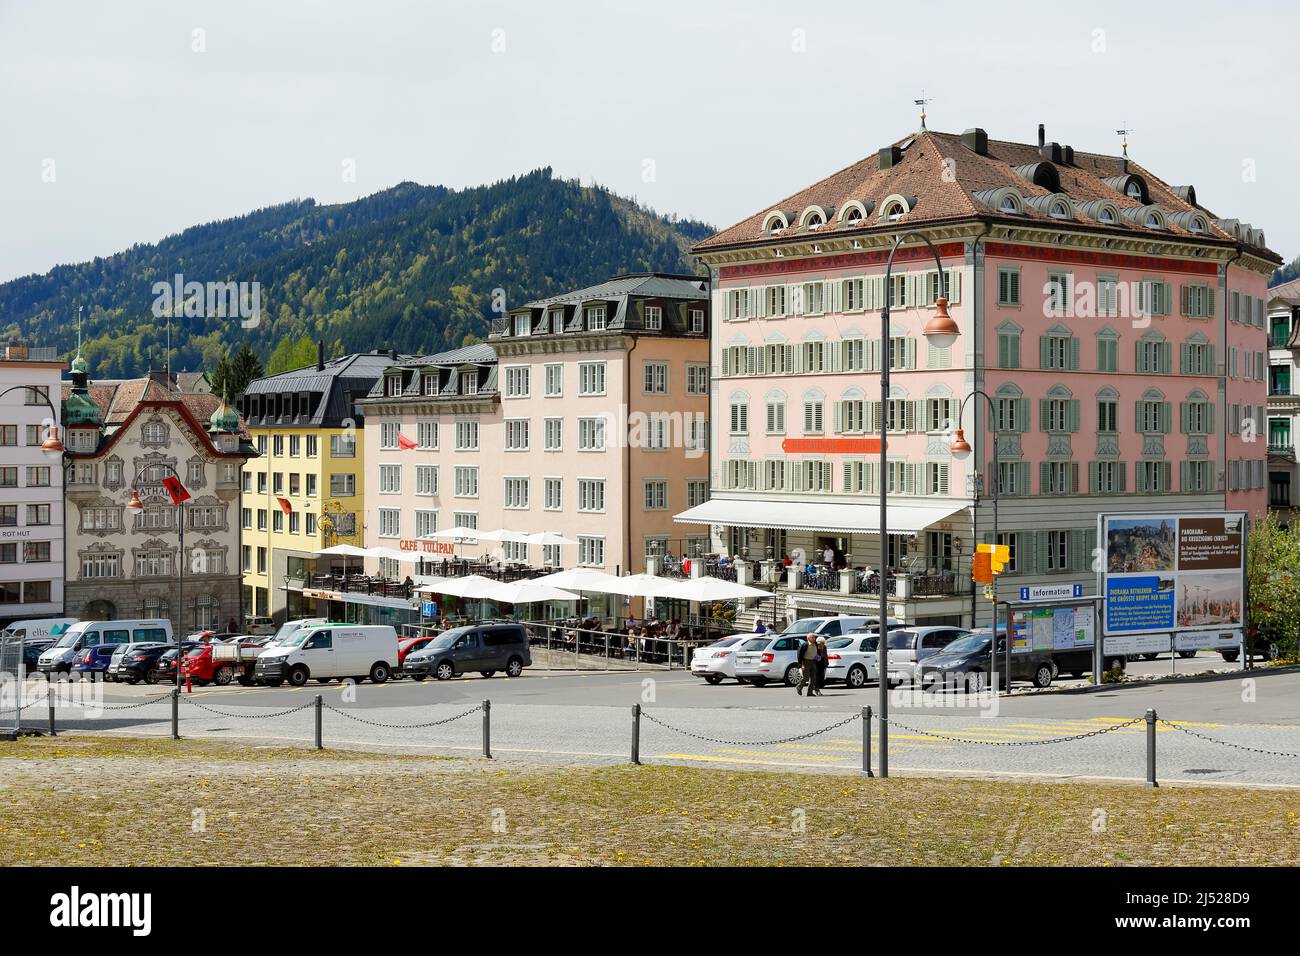 Einsiedeln, Switzerland - May 09, 2016: The colorful facades of the buildings and cars on the street show a city that is often visited by pilgrims and Stock Photo